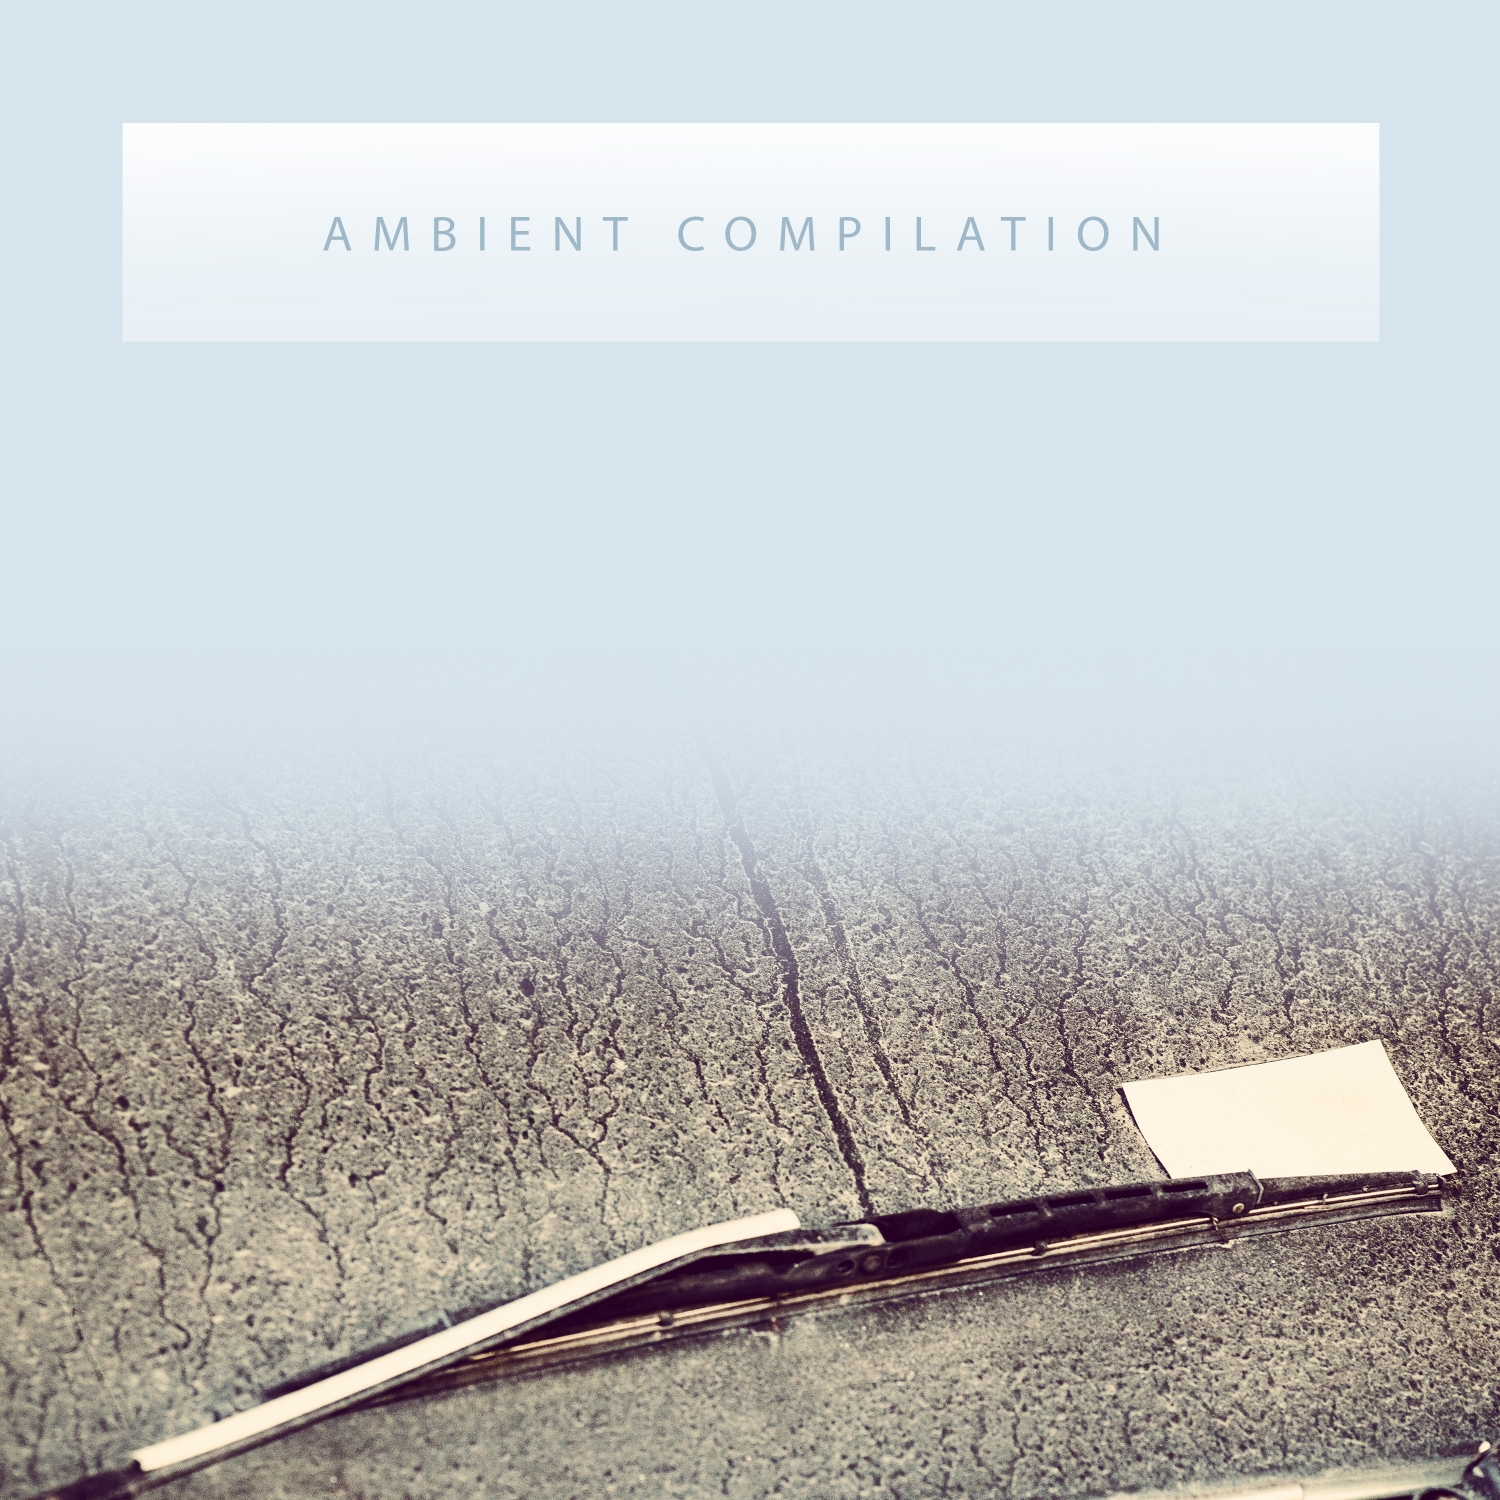 2018 Ambient Compilation: Loopable Rain and Nature Compilation